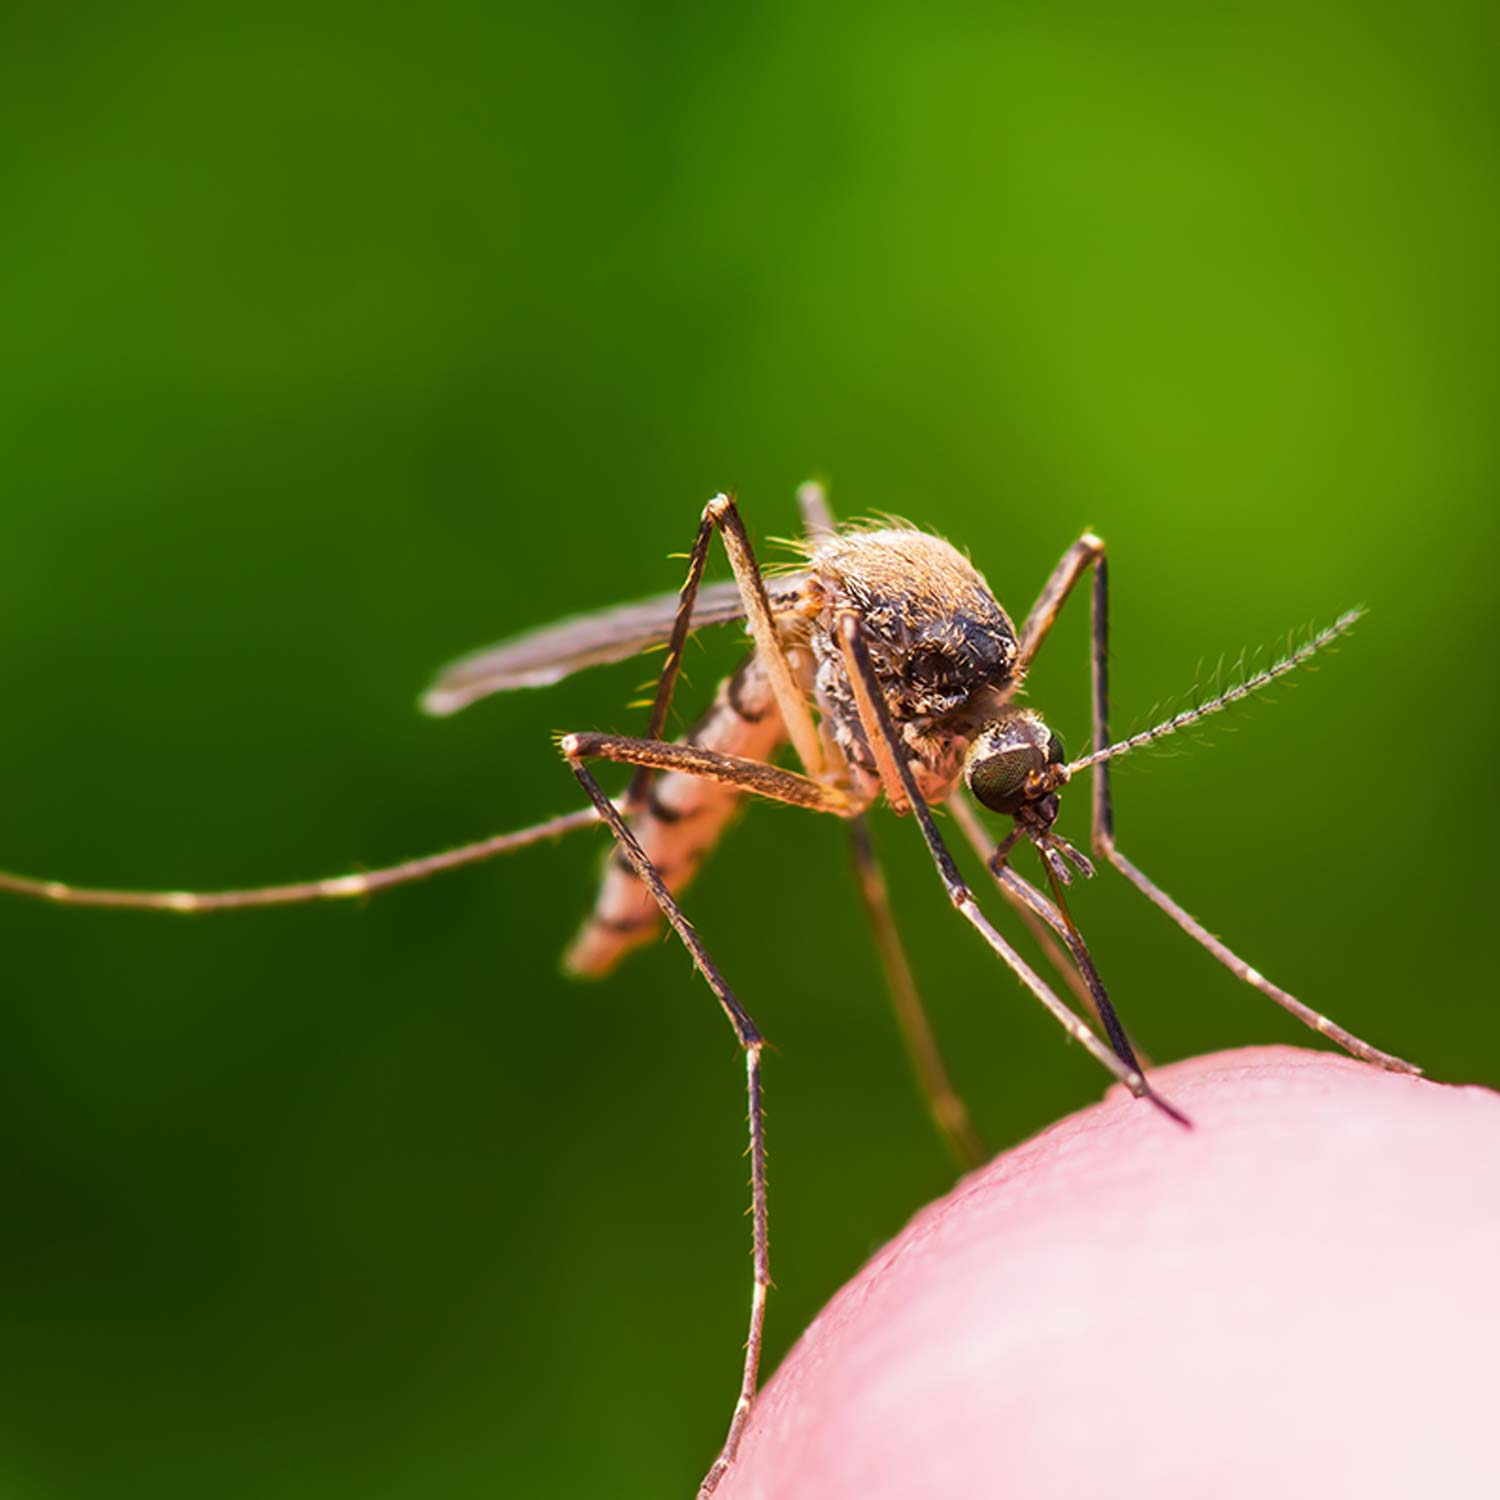 Australian researchers can now 'virtually eradicate' an introduced 'disease-ridden' mosquito species